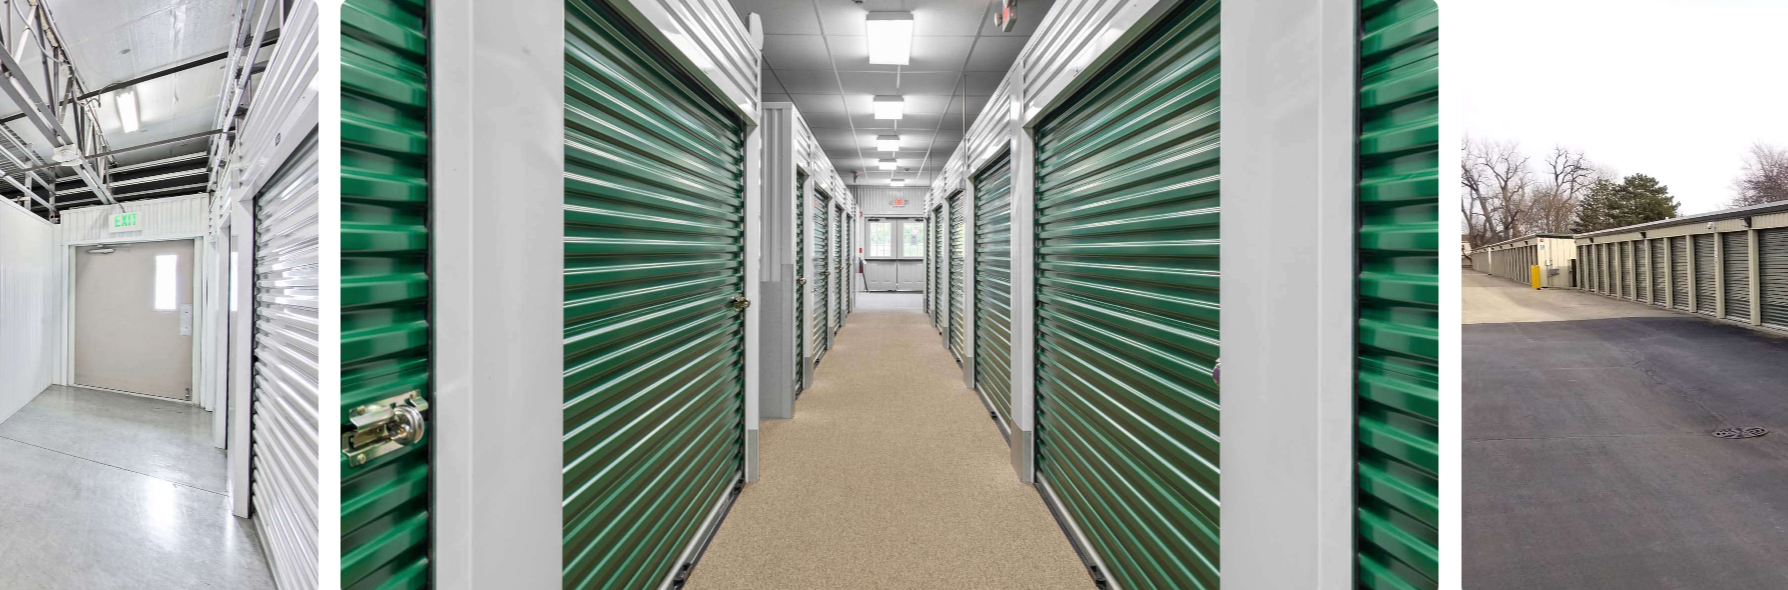 Exclusive: Etude Storage Partners Makes Bid to Take Global Self Storage Private for $6.15 Per Share in Cash